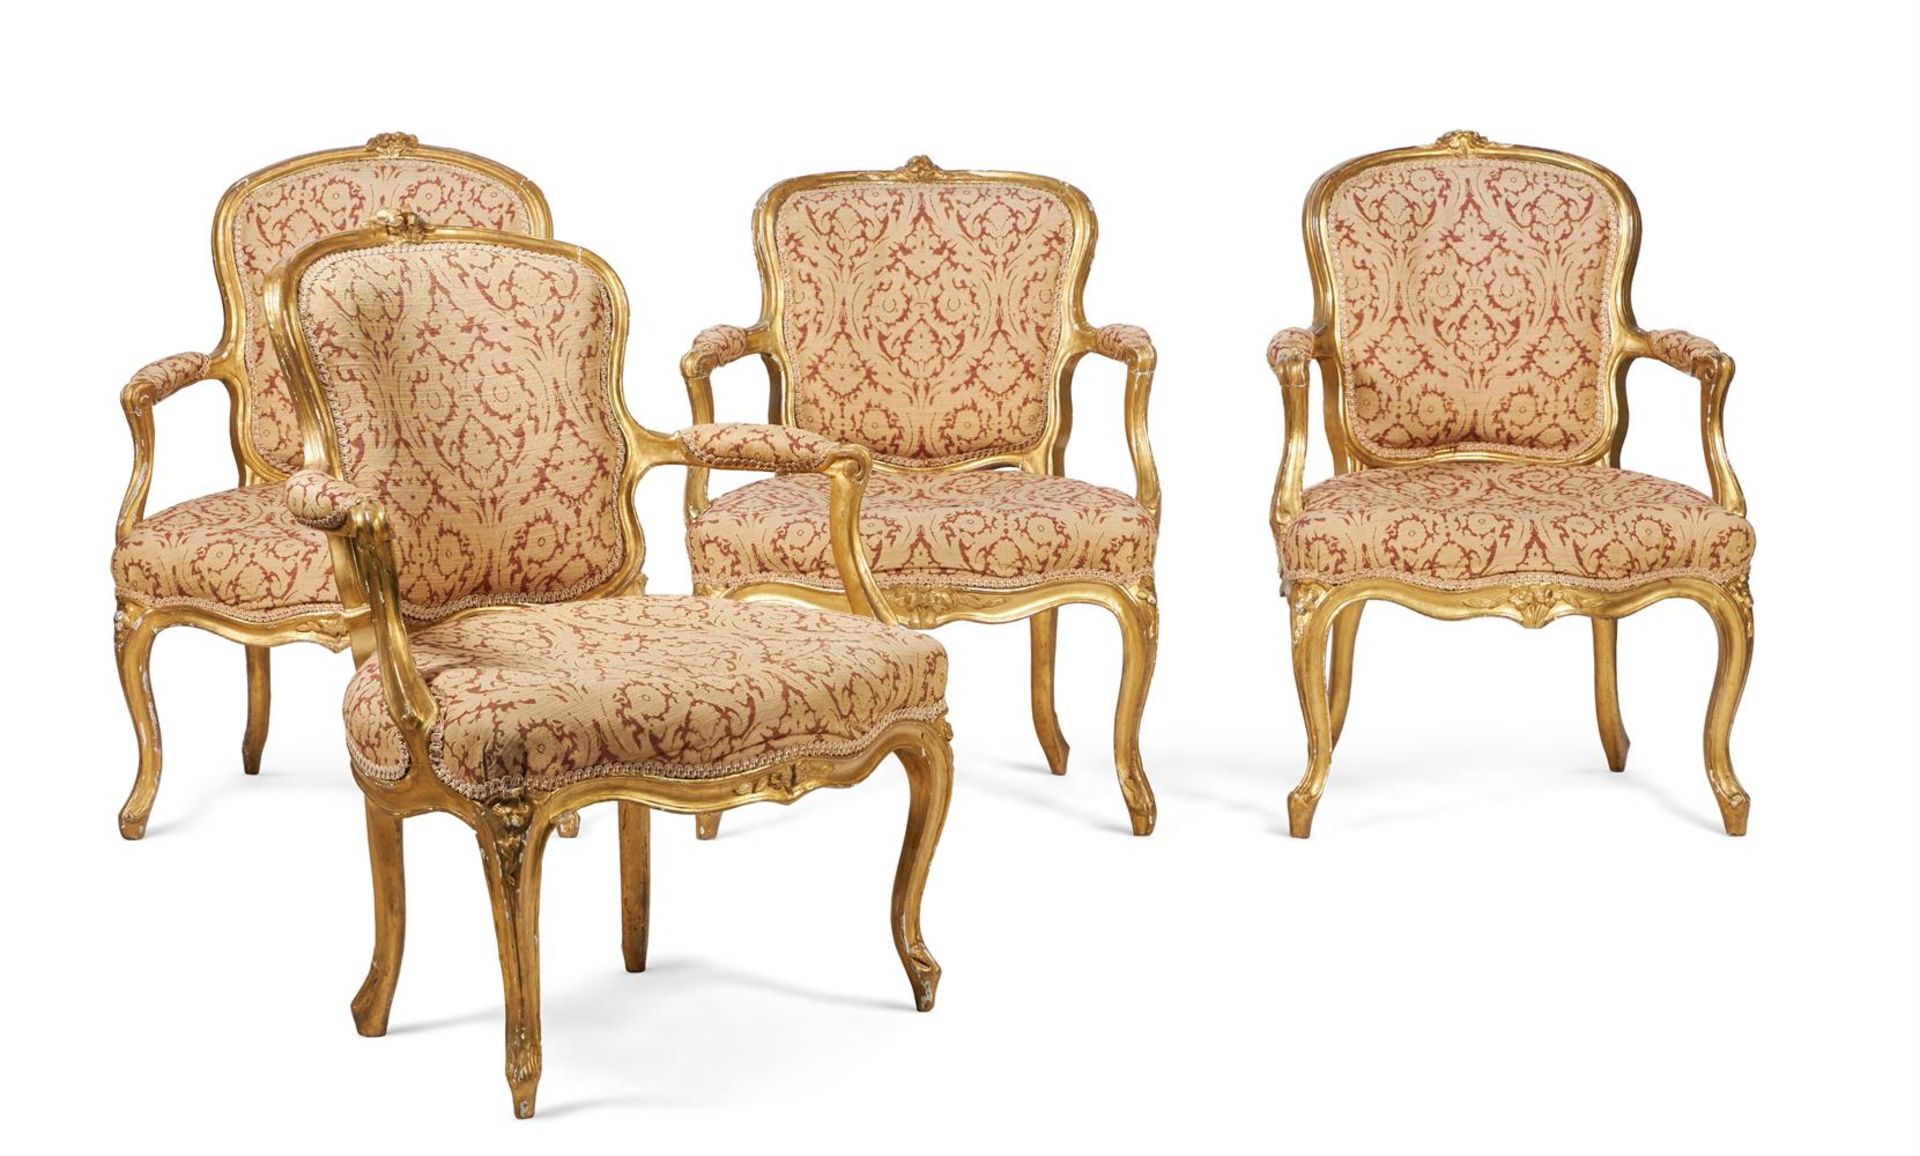 A HARLEQUIN SET OF EIGHT LOUIS XV GILTWOOD FAUTEUILS, CIRCA 1760-80 - Image 4 of 4